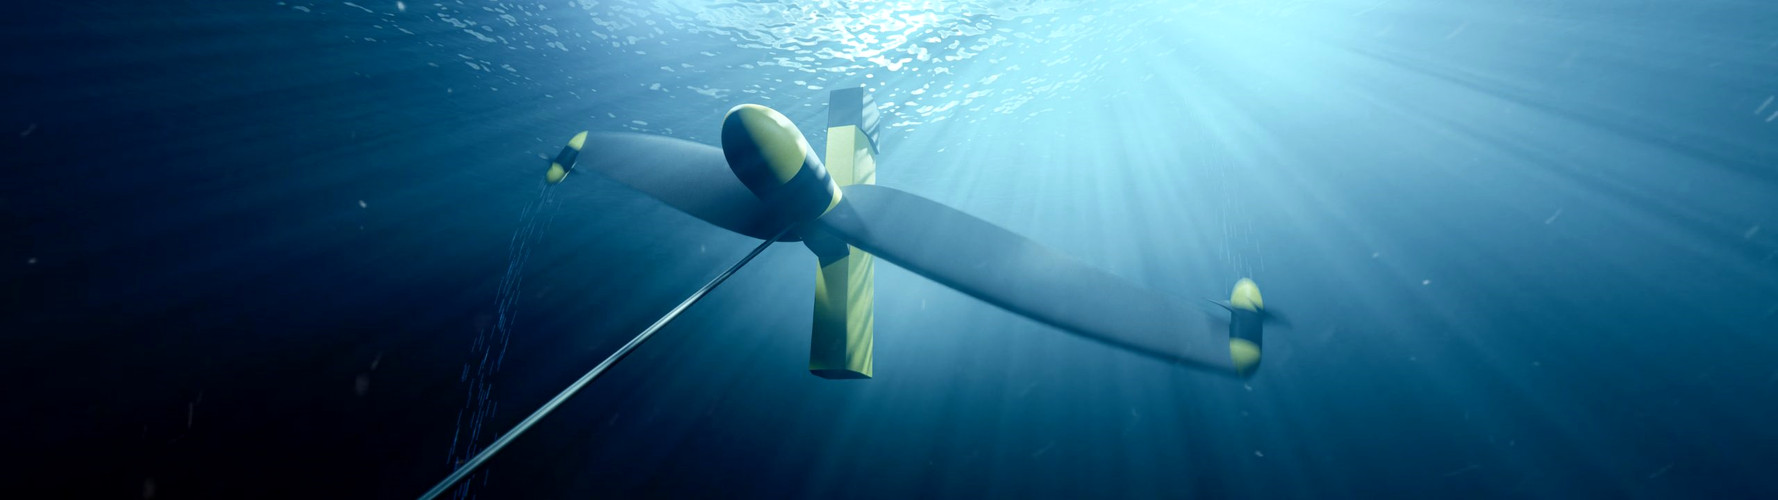 Concept for Equinox Ocean Turbines' technology (Courtesy of Equinox Ocean Turbines)